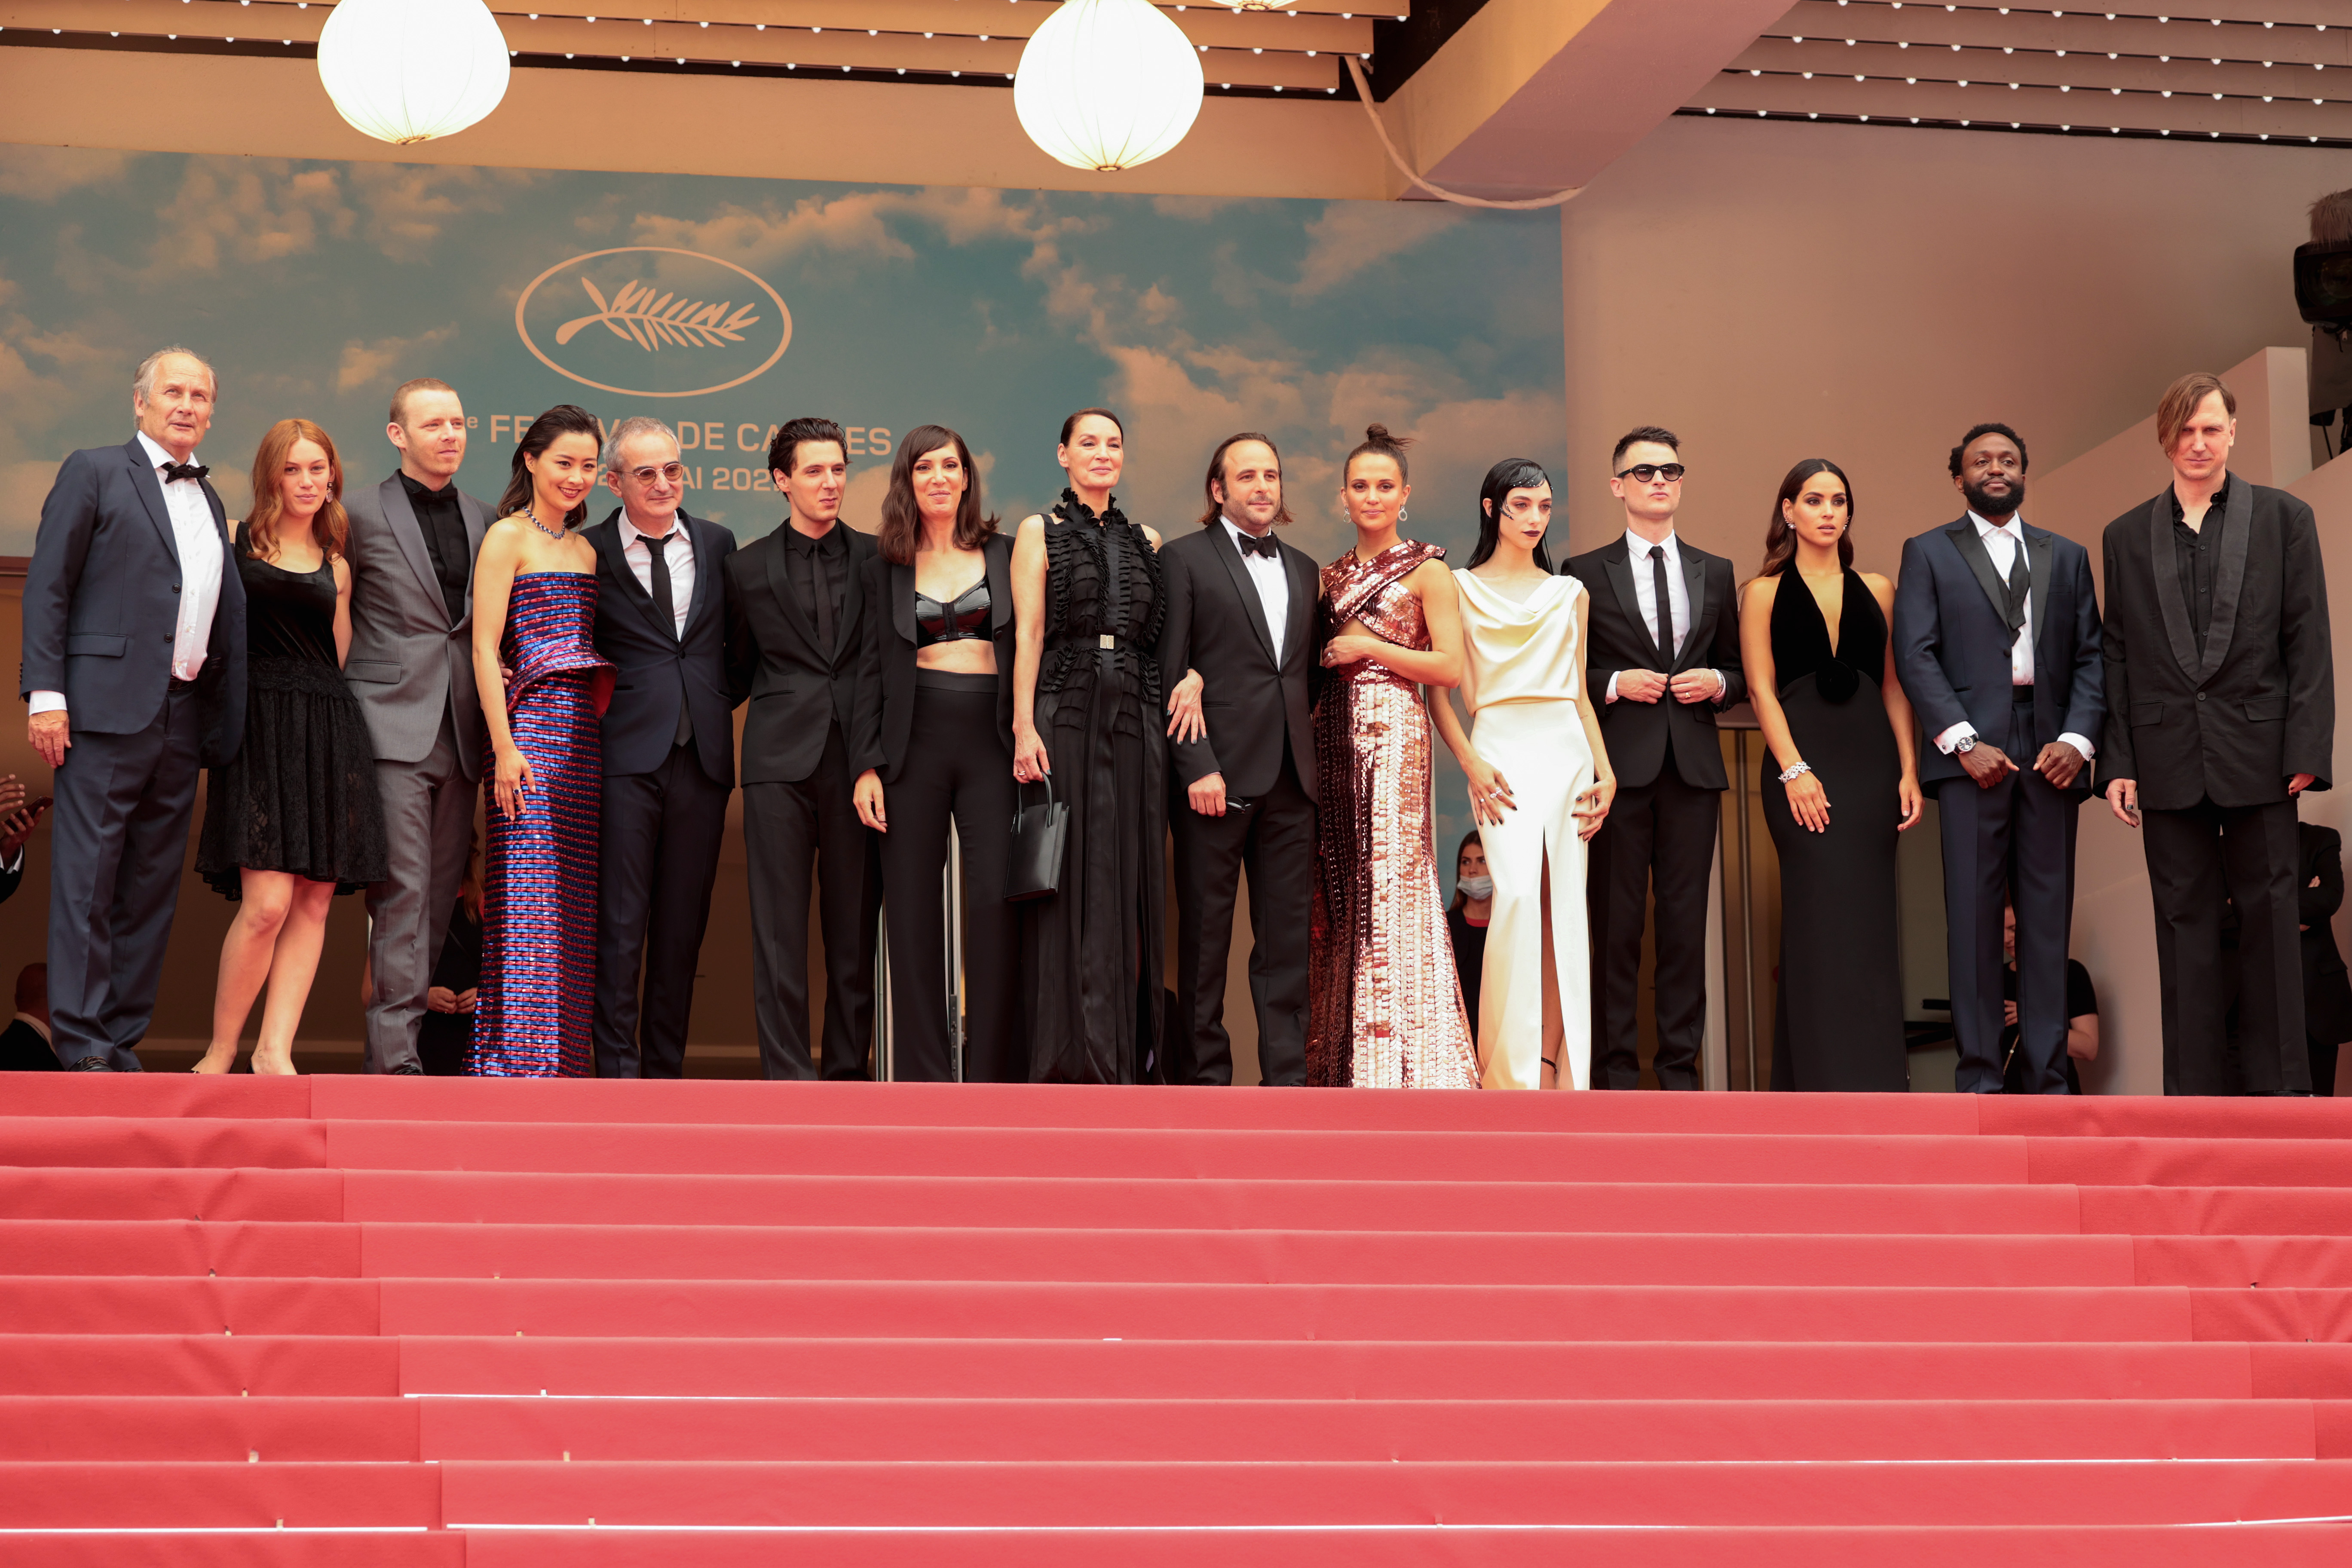 Alicia Vikander and Michael Fassbender Walk Red Carpet at Cannes